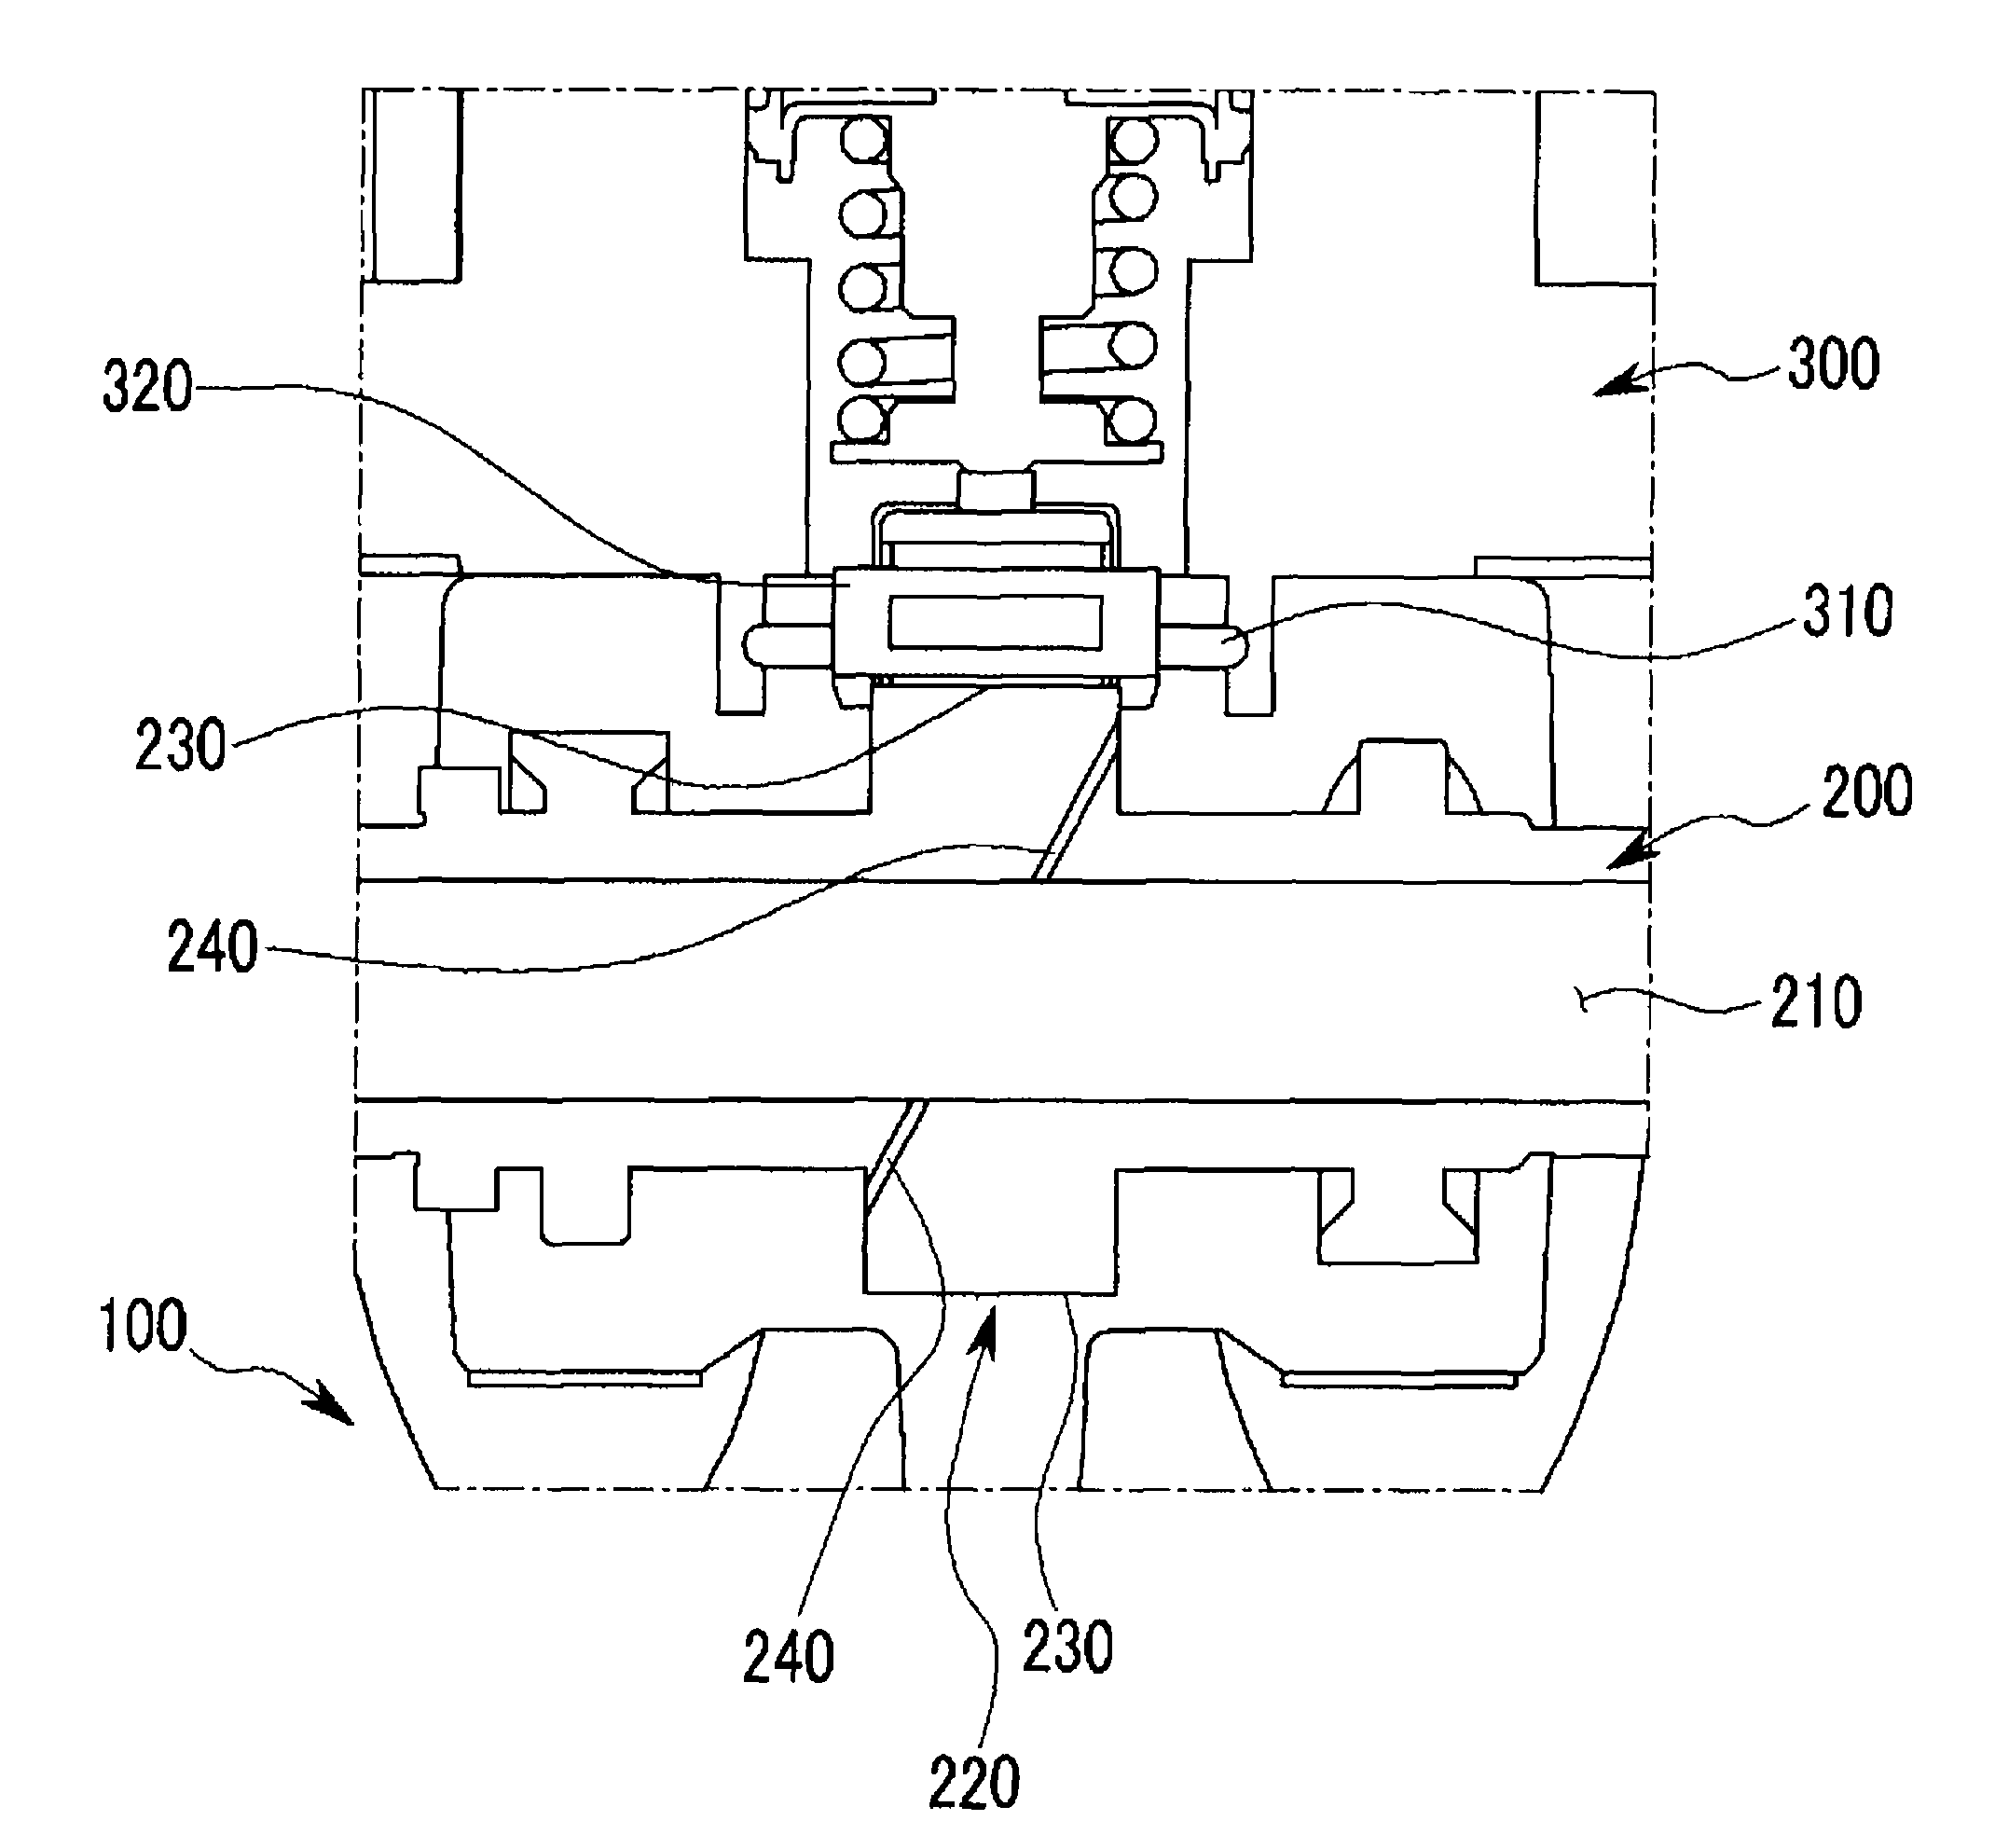 Lubrication apparatus of fuel pump driven by fuel pump drive cam